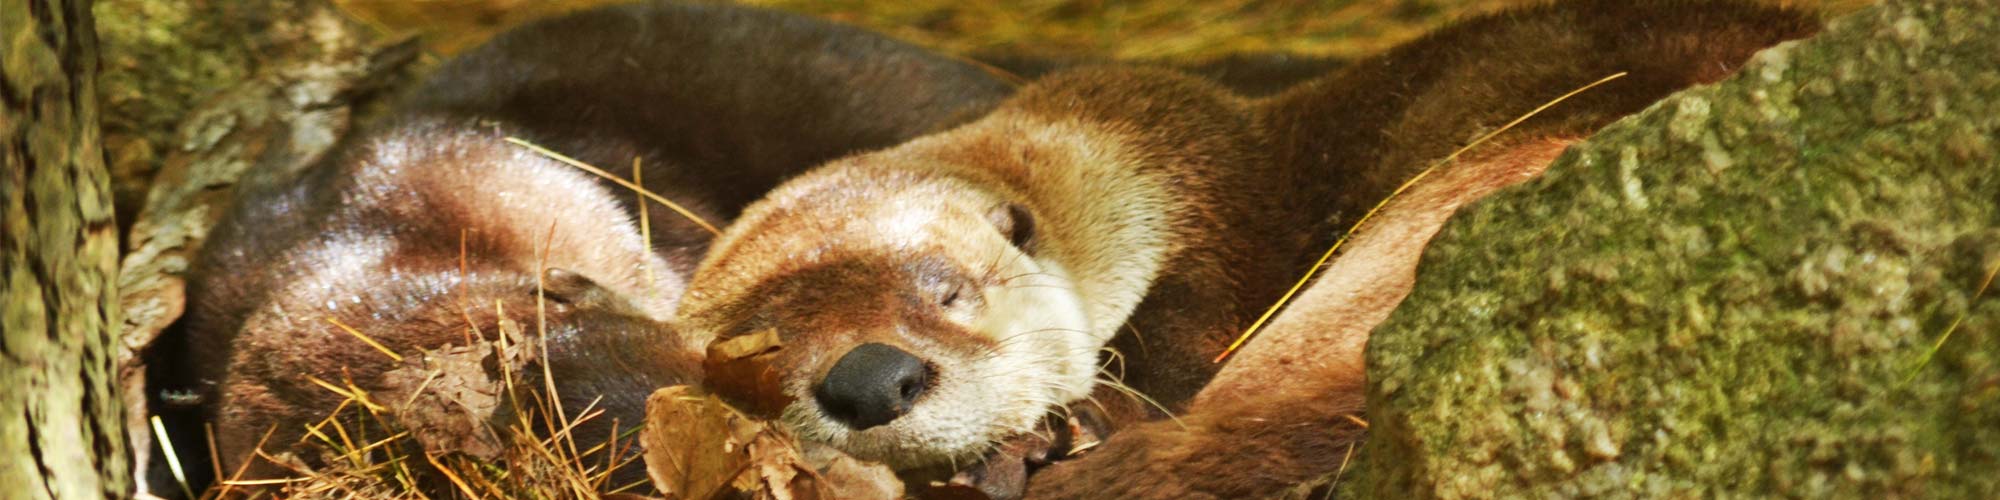 Two river otters curled up sleeping.